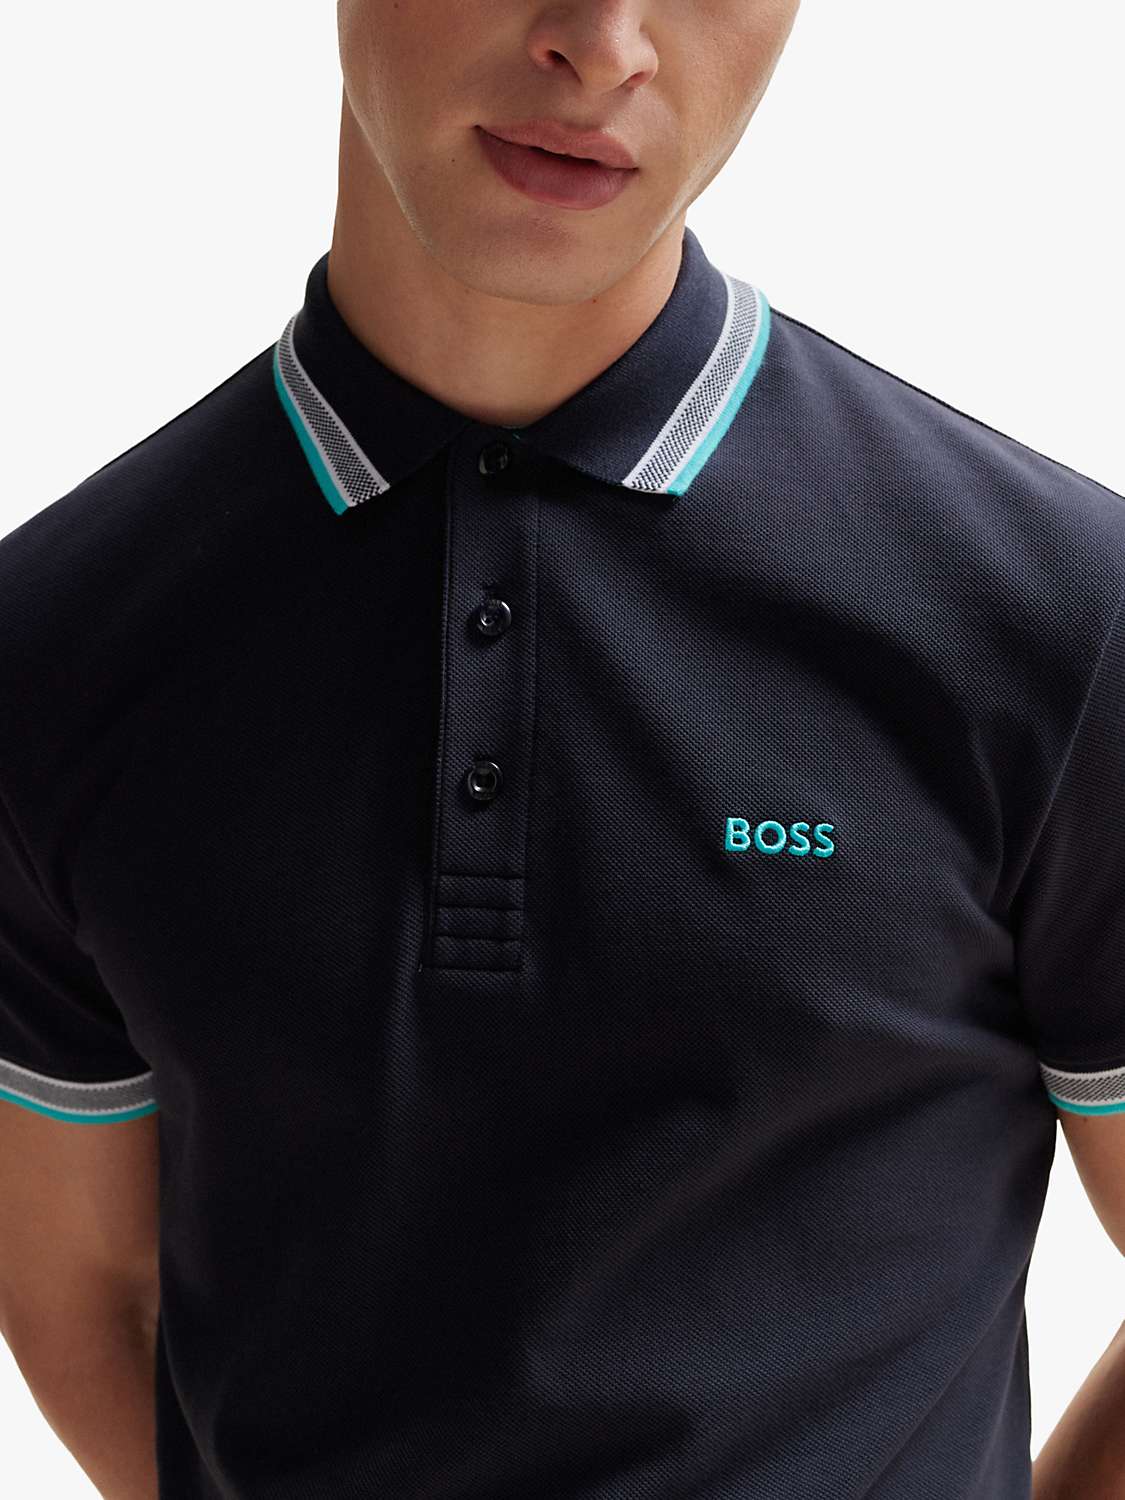 Buy BOSS Paddy 404 Cotton Polo Top, Dark Blue Online at johnlewis.com